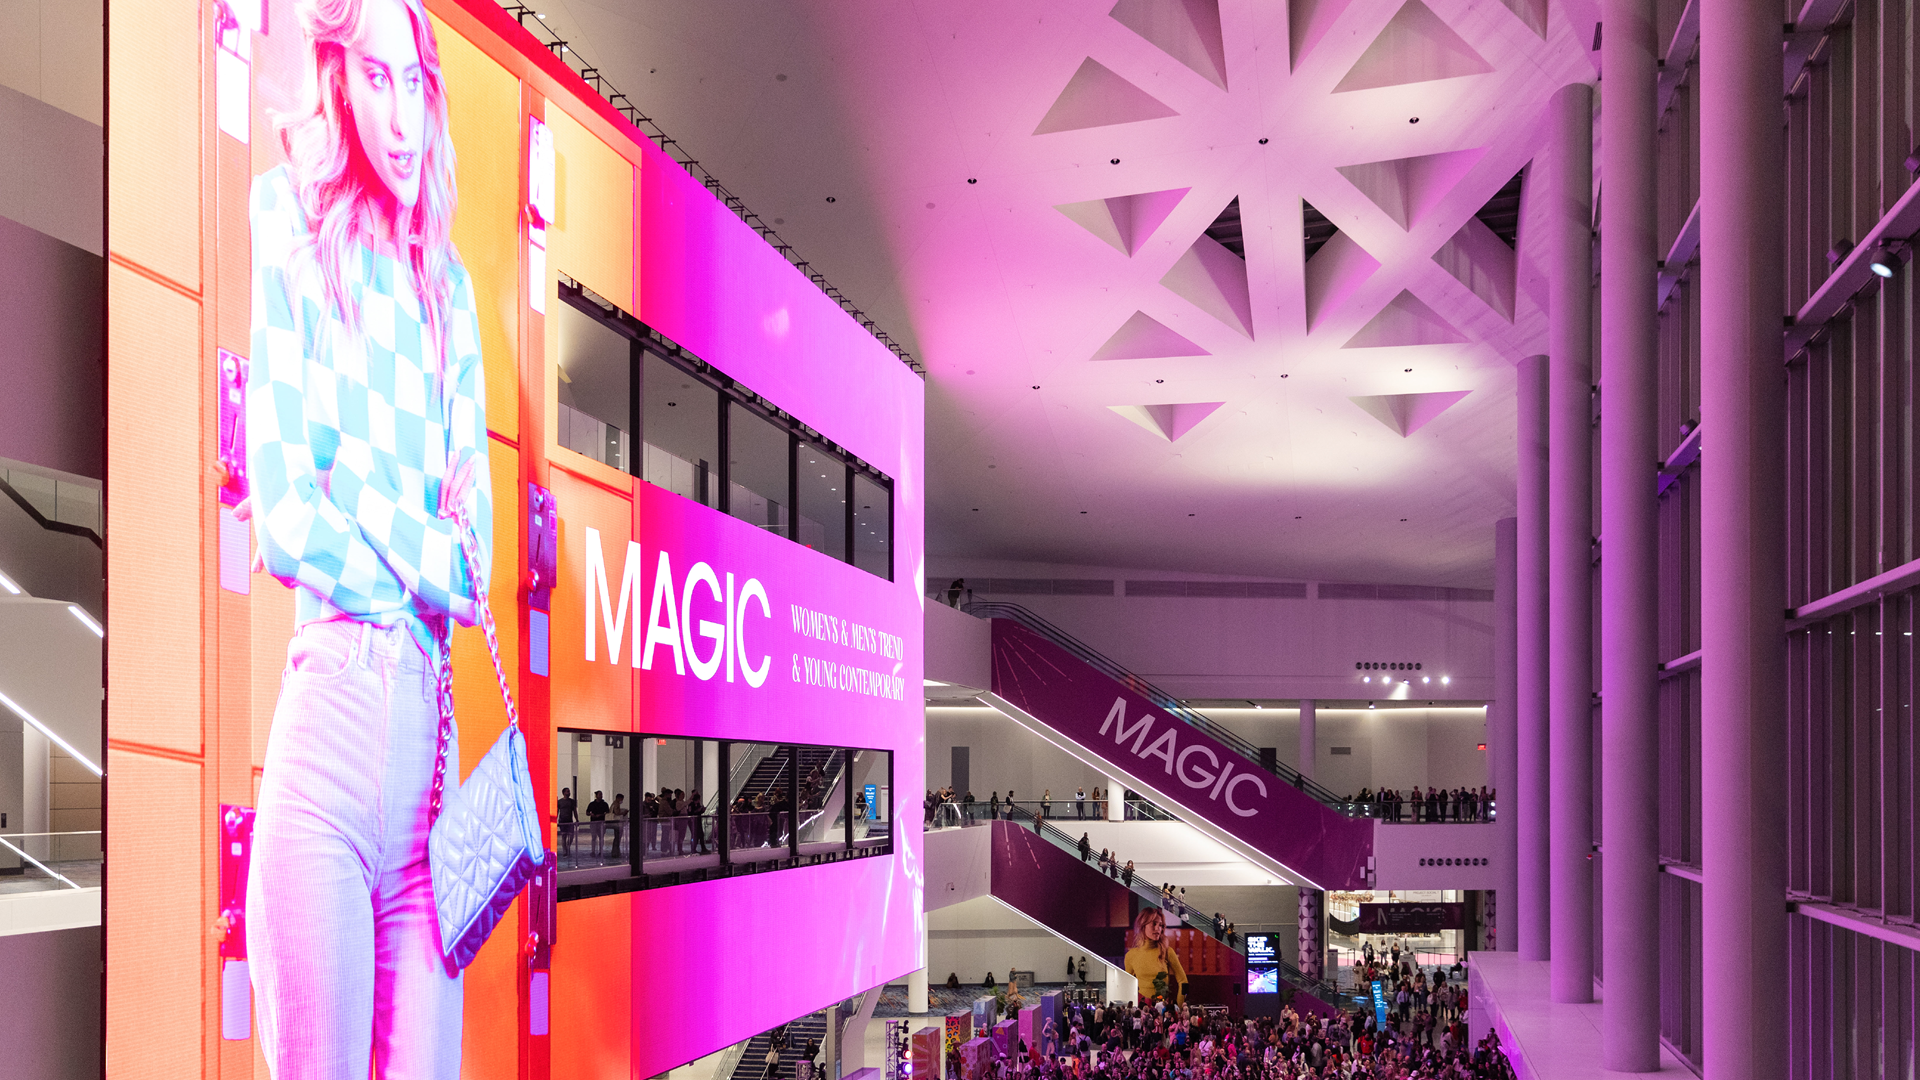 MAGIC returns to Las Vegas for 2022 fashion industry show, Conventions